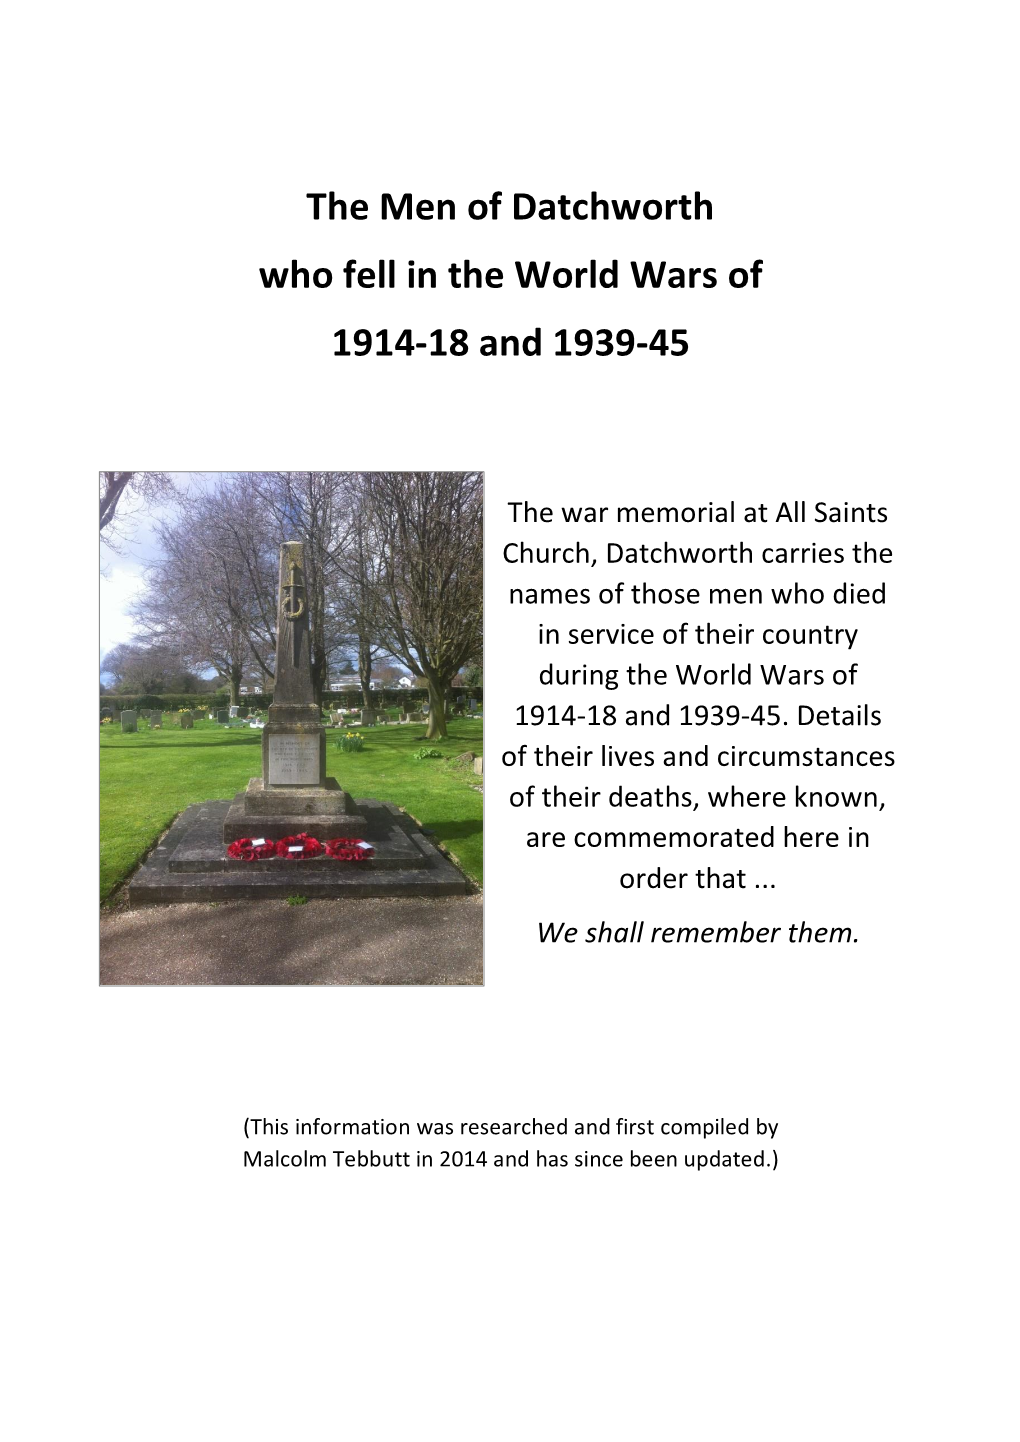 The Men of Datchworth Who Fell in the World Wars of 1914-18 and 1939-45